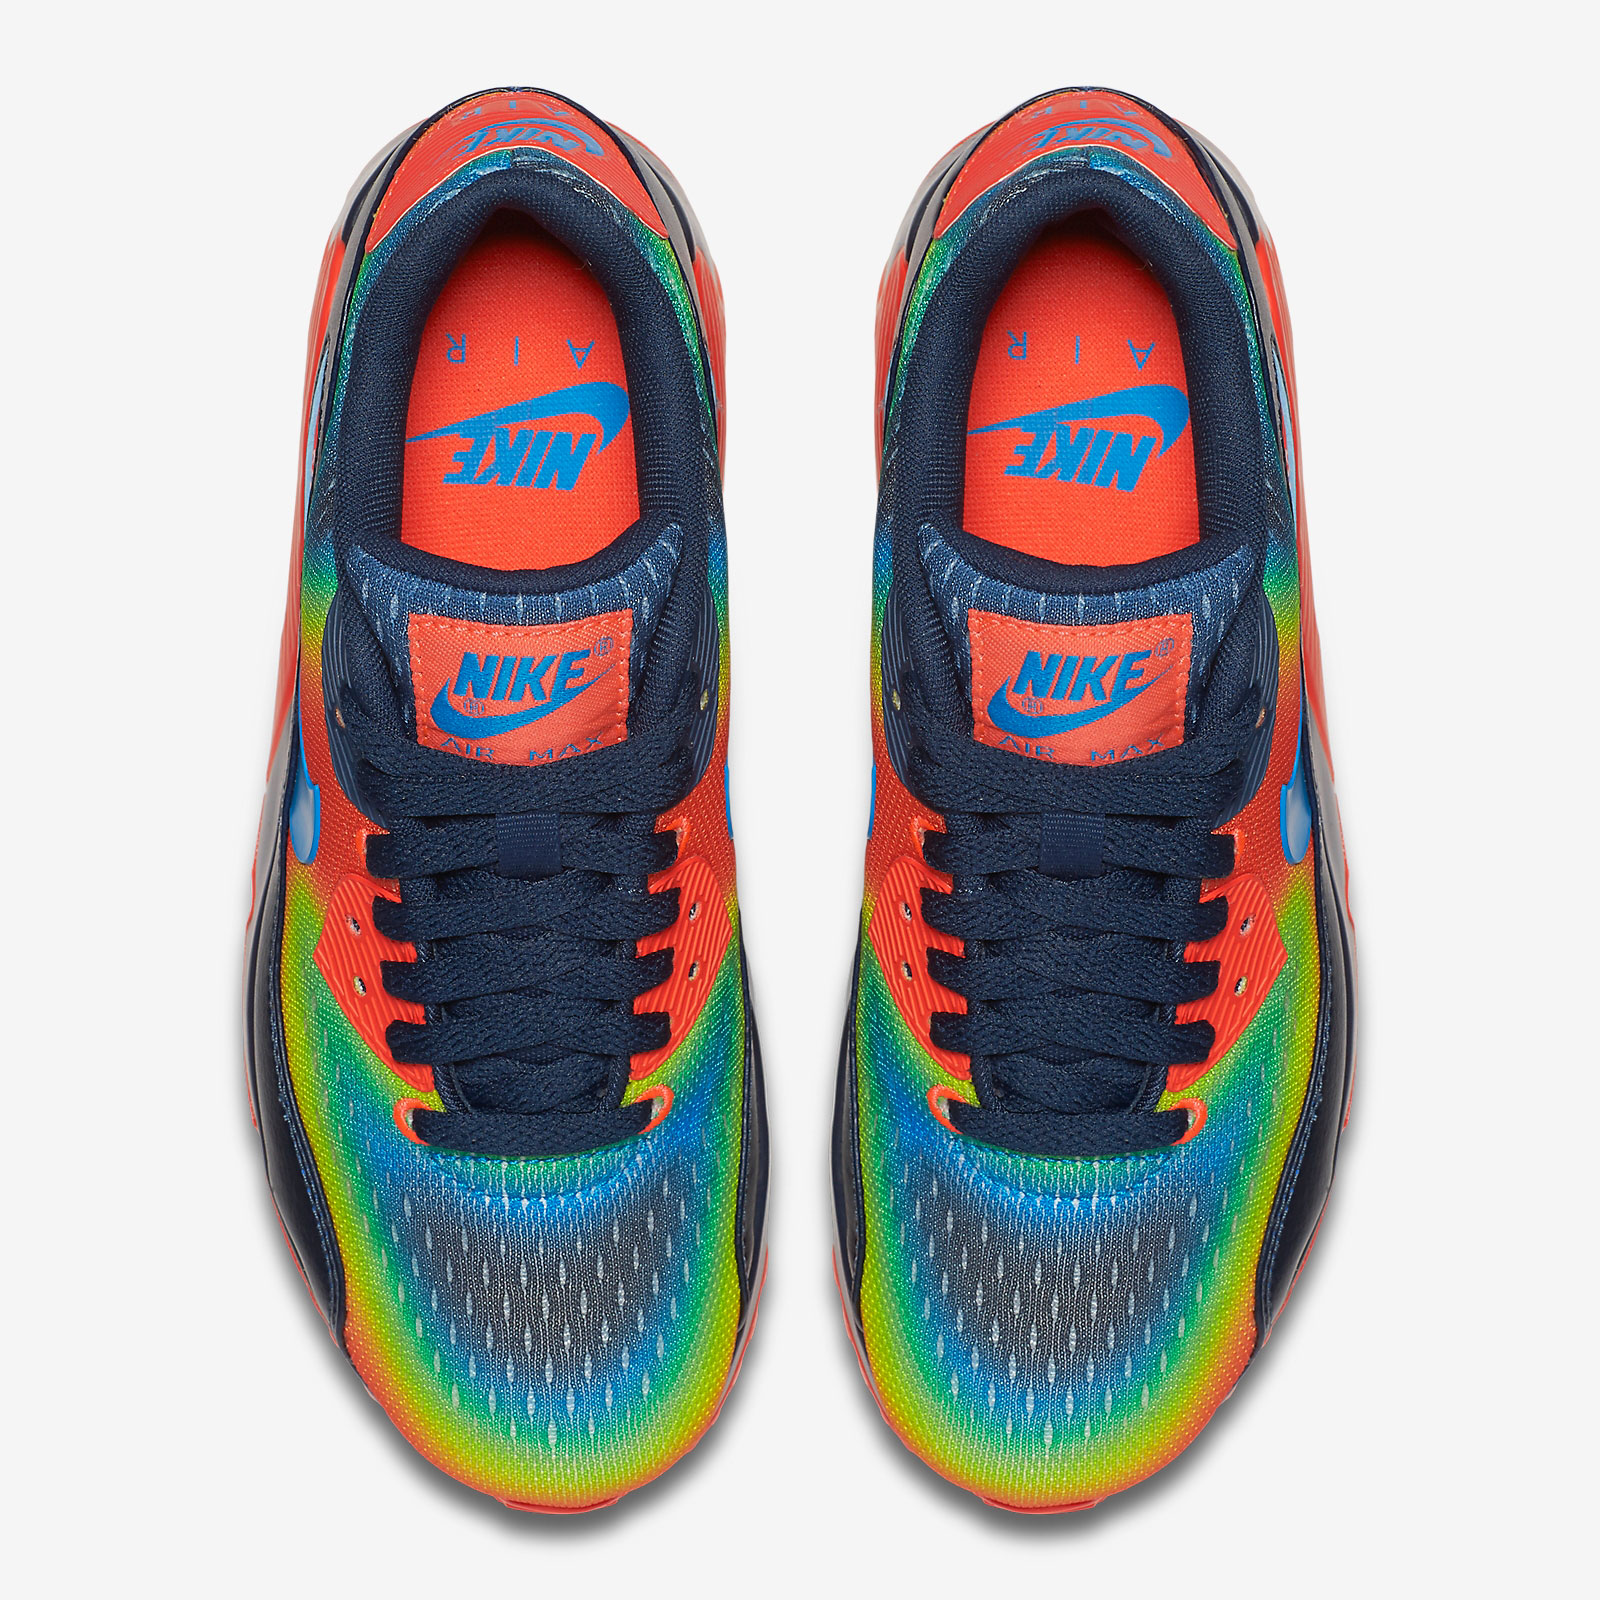 Puno Infecteren Overblijvend Nike Presents The Heat Map Pack Featuring Air More Uptempo, Air Max 90, And Air  Max 2016 - SneakerNews.com